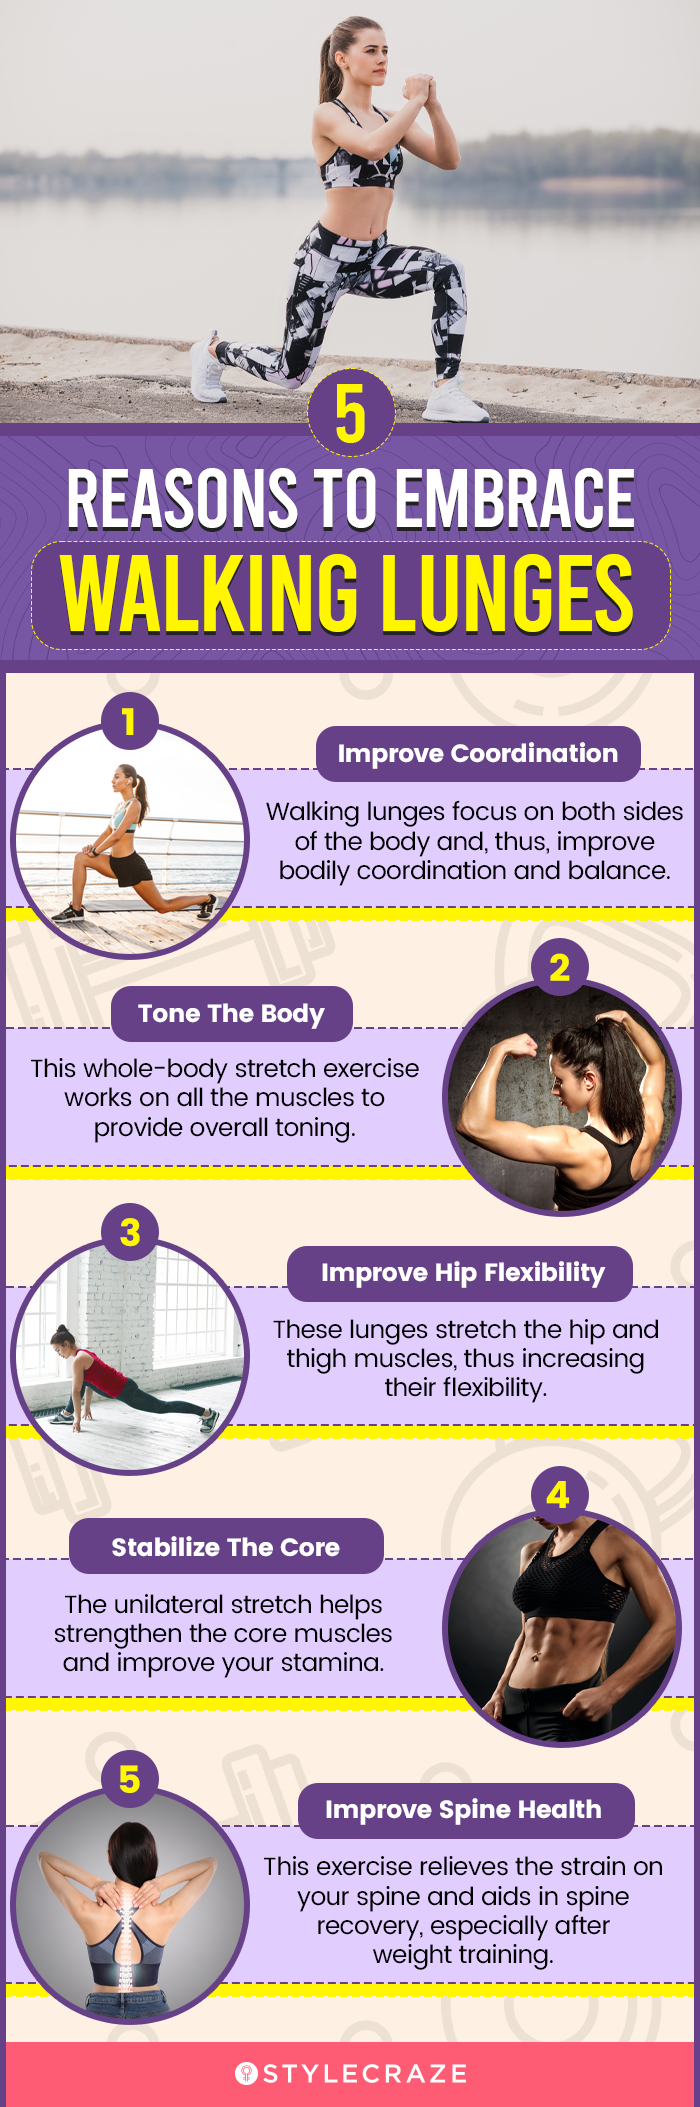 5 reasons to embrace walking lunges (infographic)